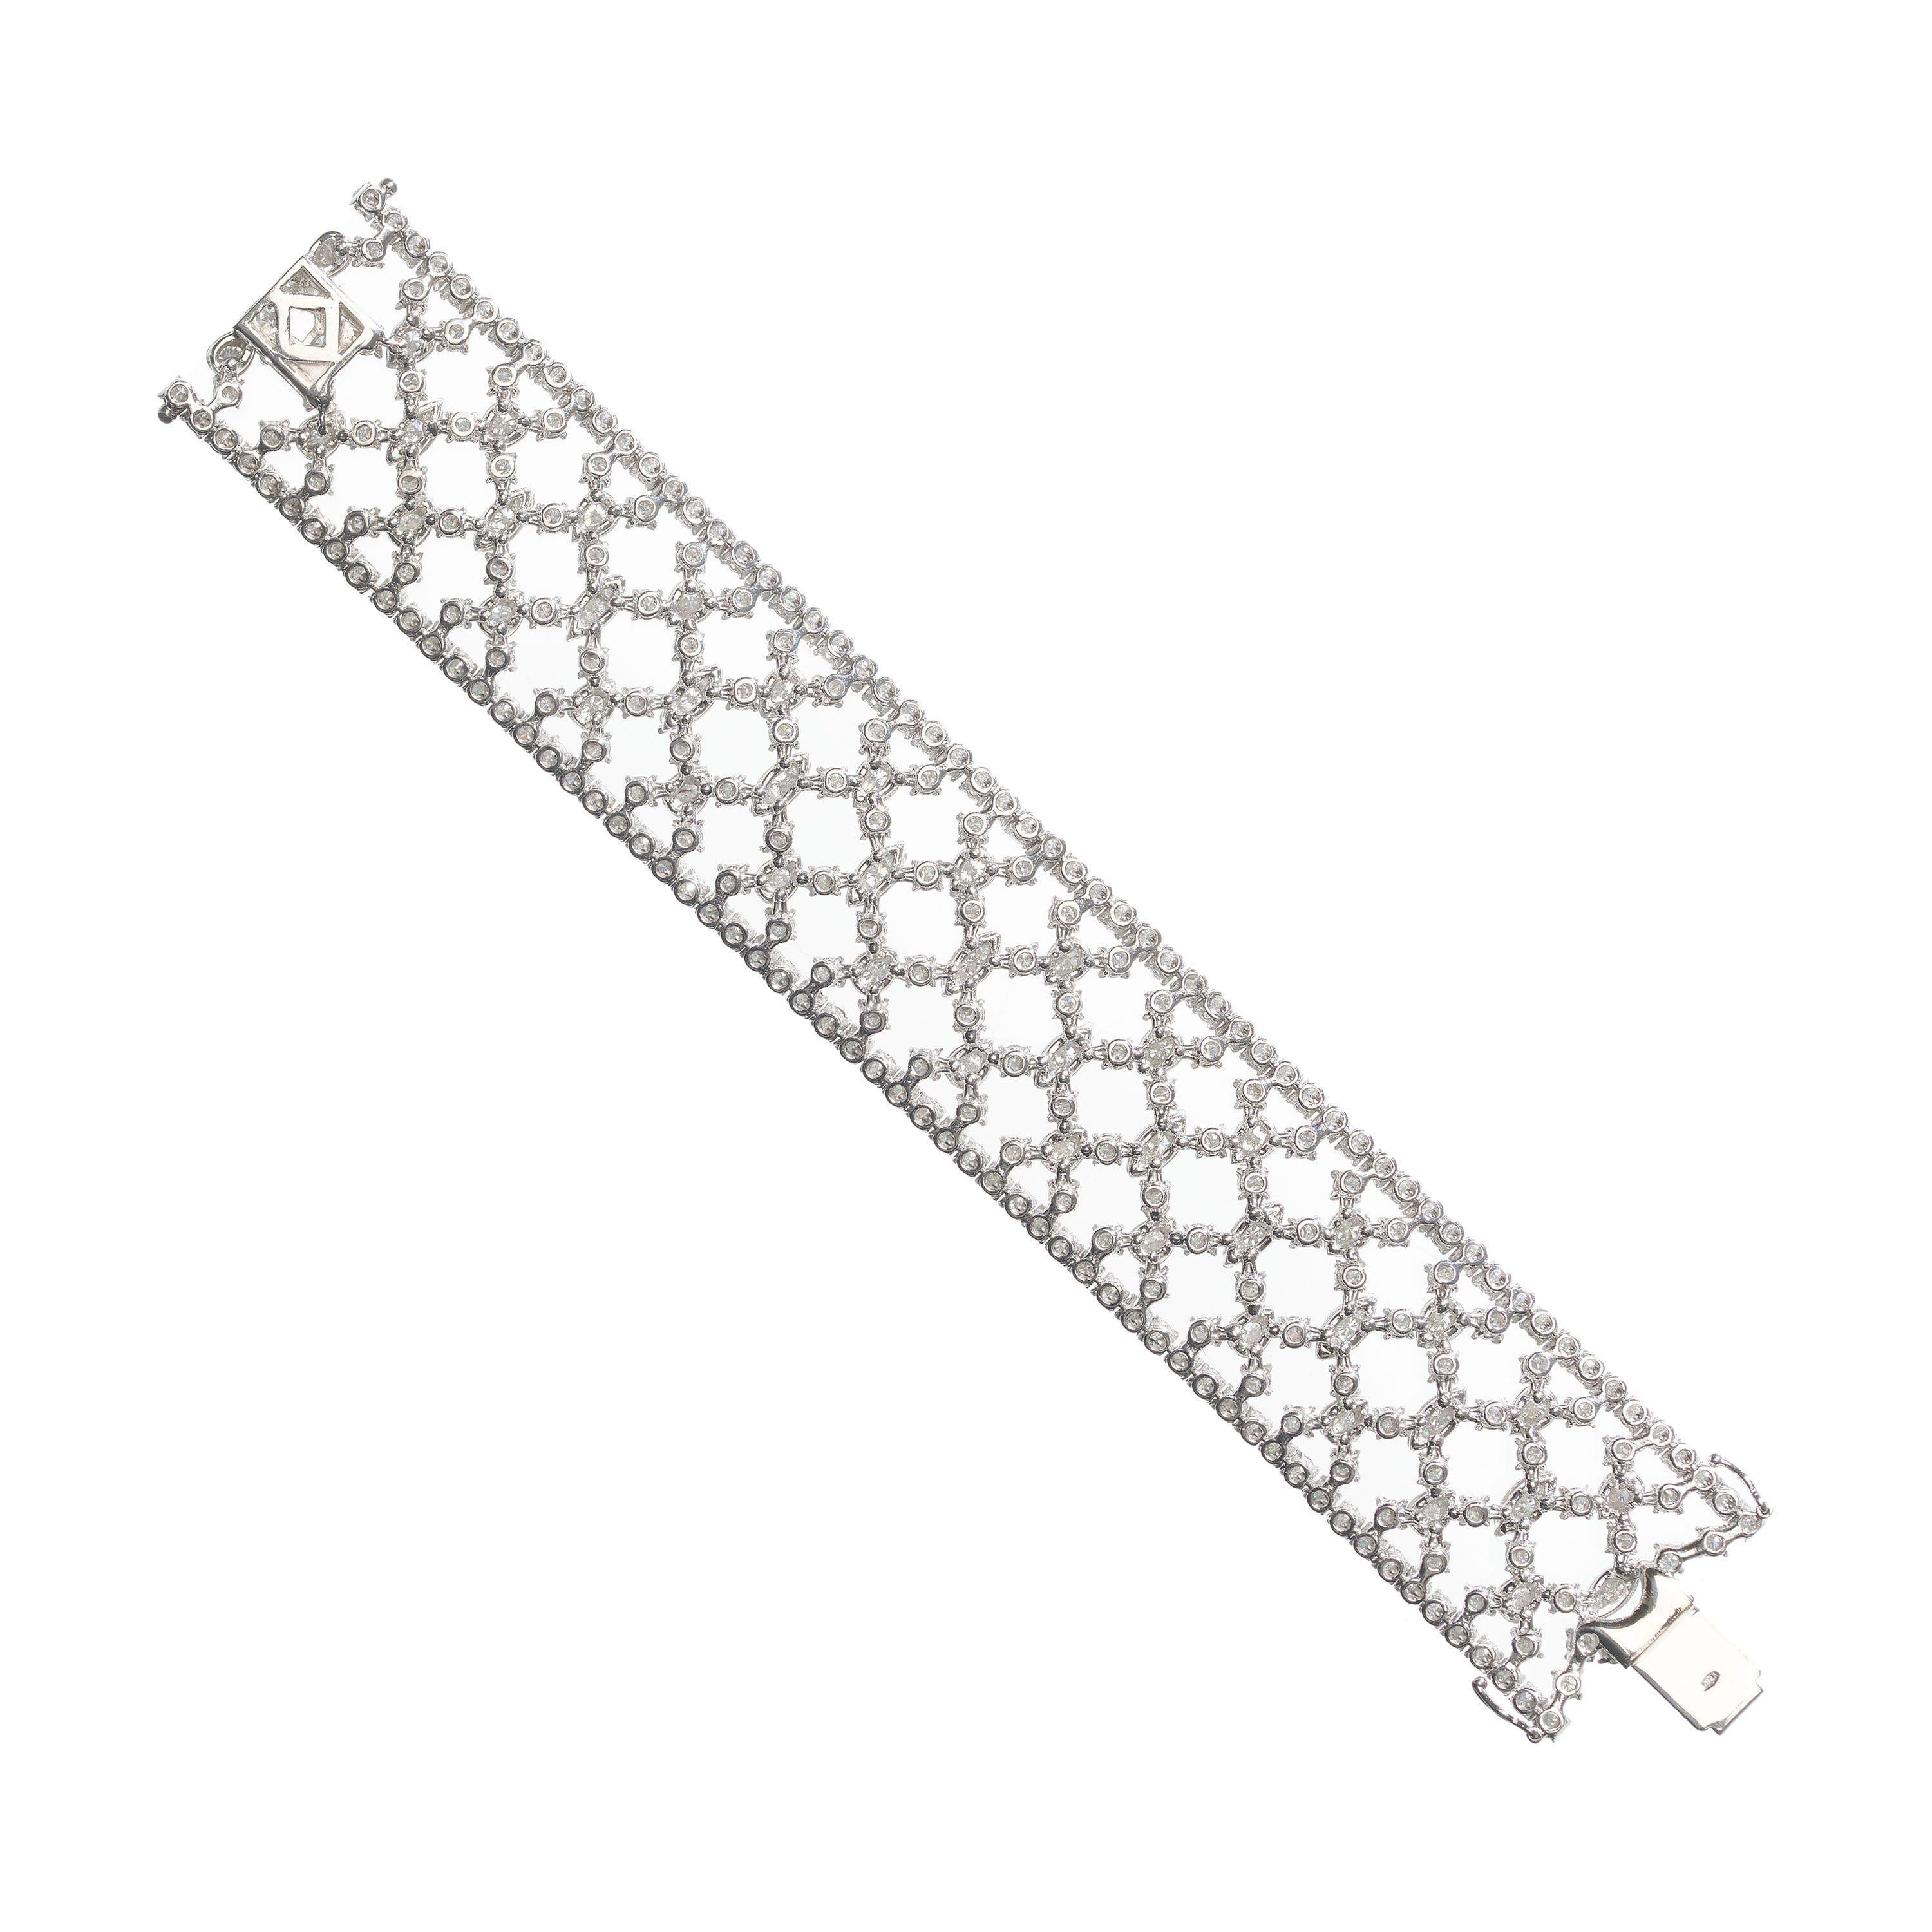 A modern wide, diamond and white gold bracelet, set with round brilliant-cut diamonds, in four claw settings, in an articulating, cross hatch, trellis like pattern, with a diamond set border, mounted in 18ct white gold, with a box and tongue clasp,